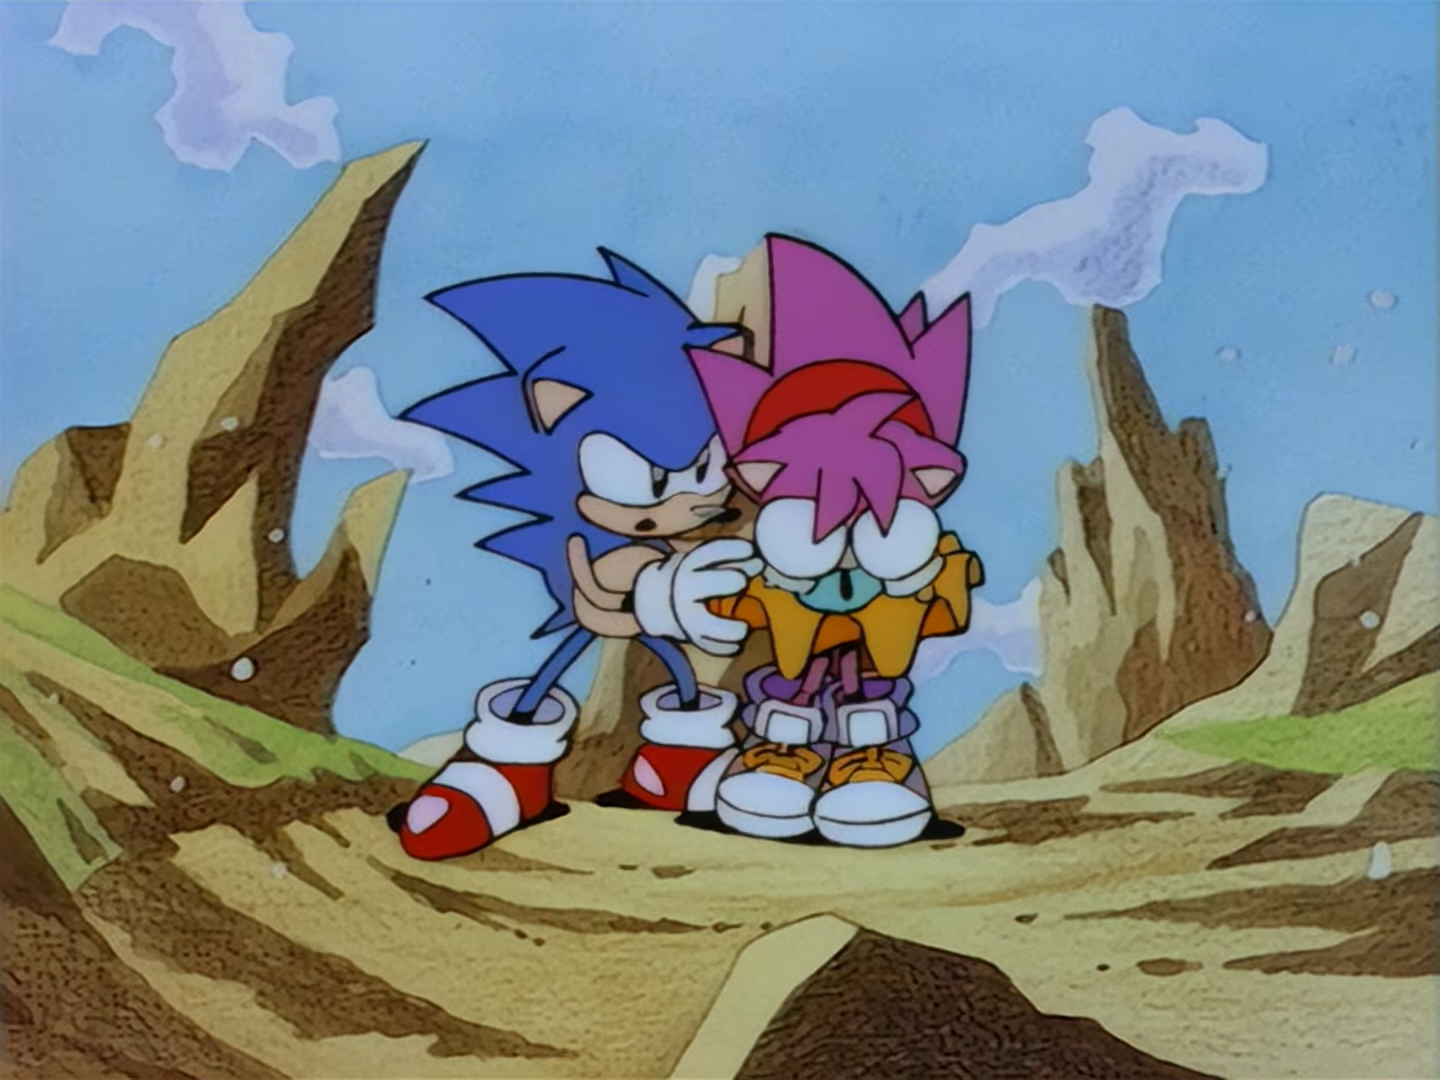 http://img4.wikia.nocookie.net/cb20130819164539/sonic/images/8/84/Amy_saved_by_...